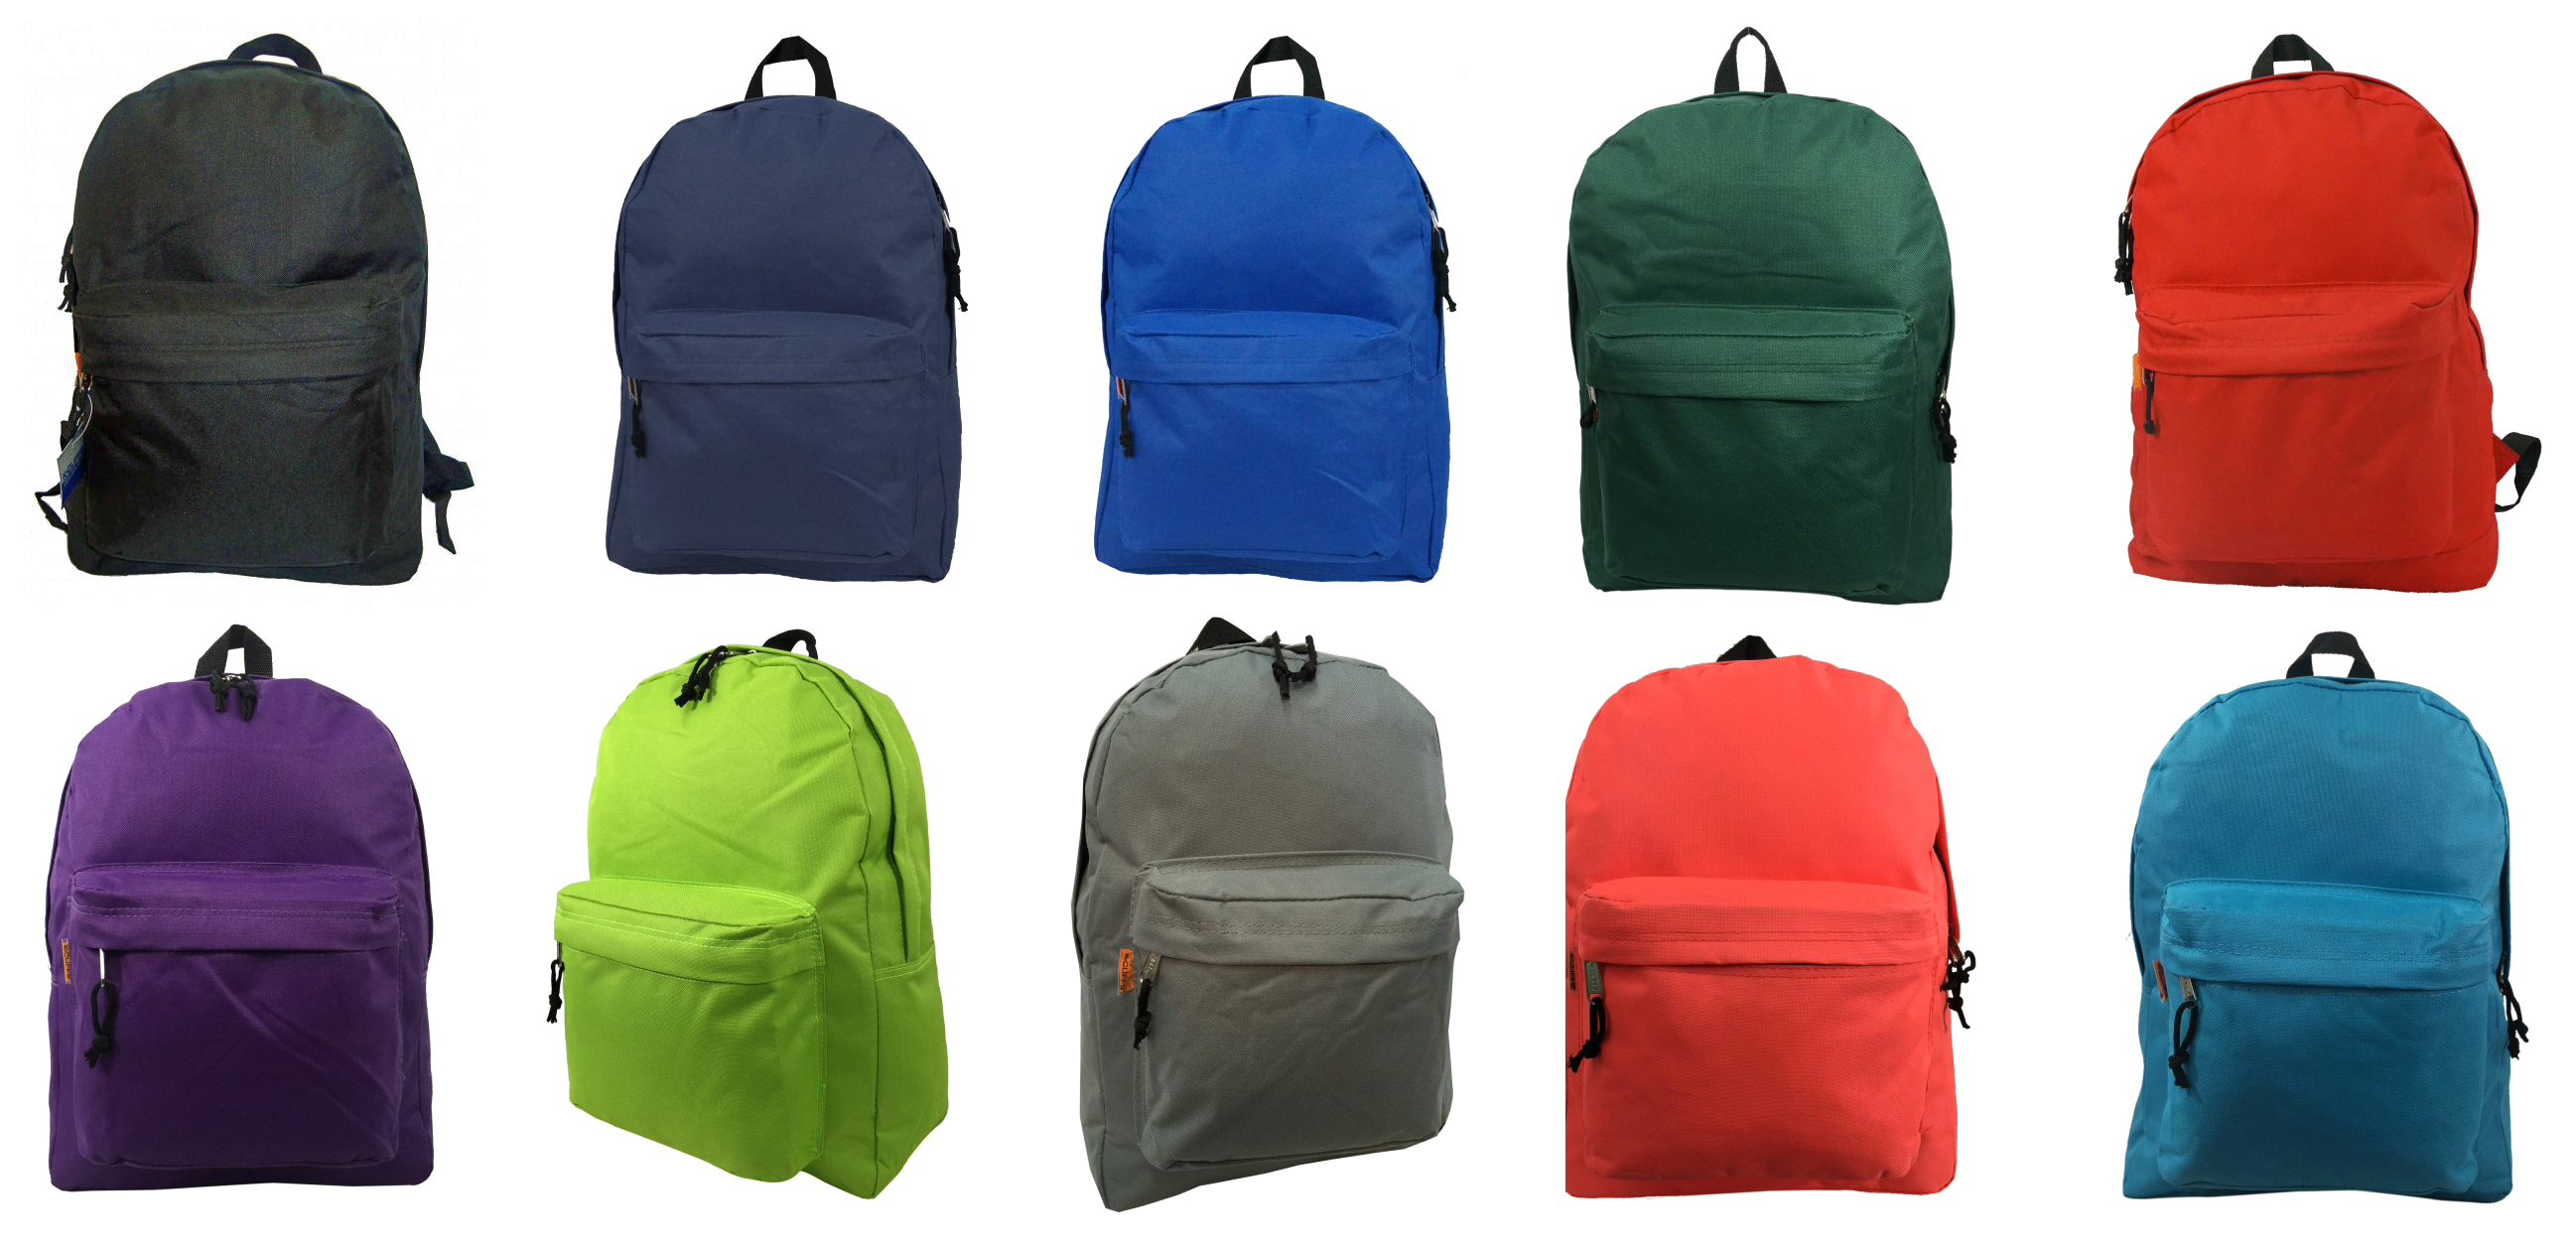 ''16'''' Classic BACKPACKs - Choose Your Color(s)''